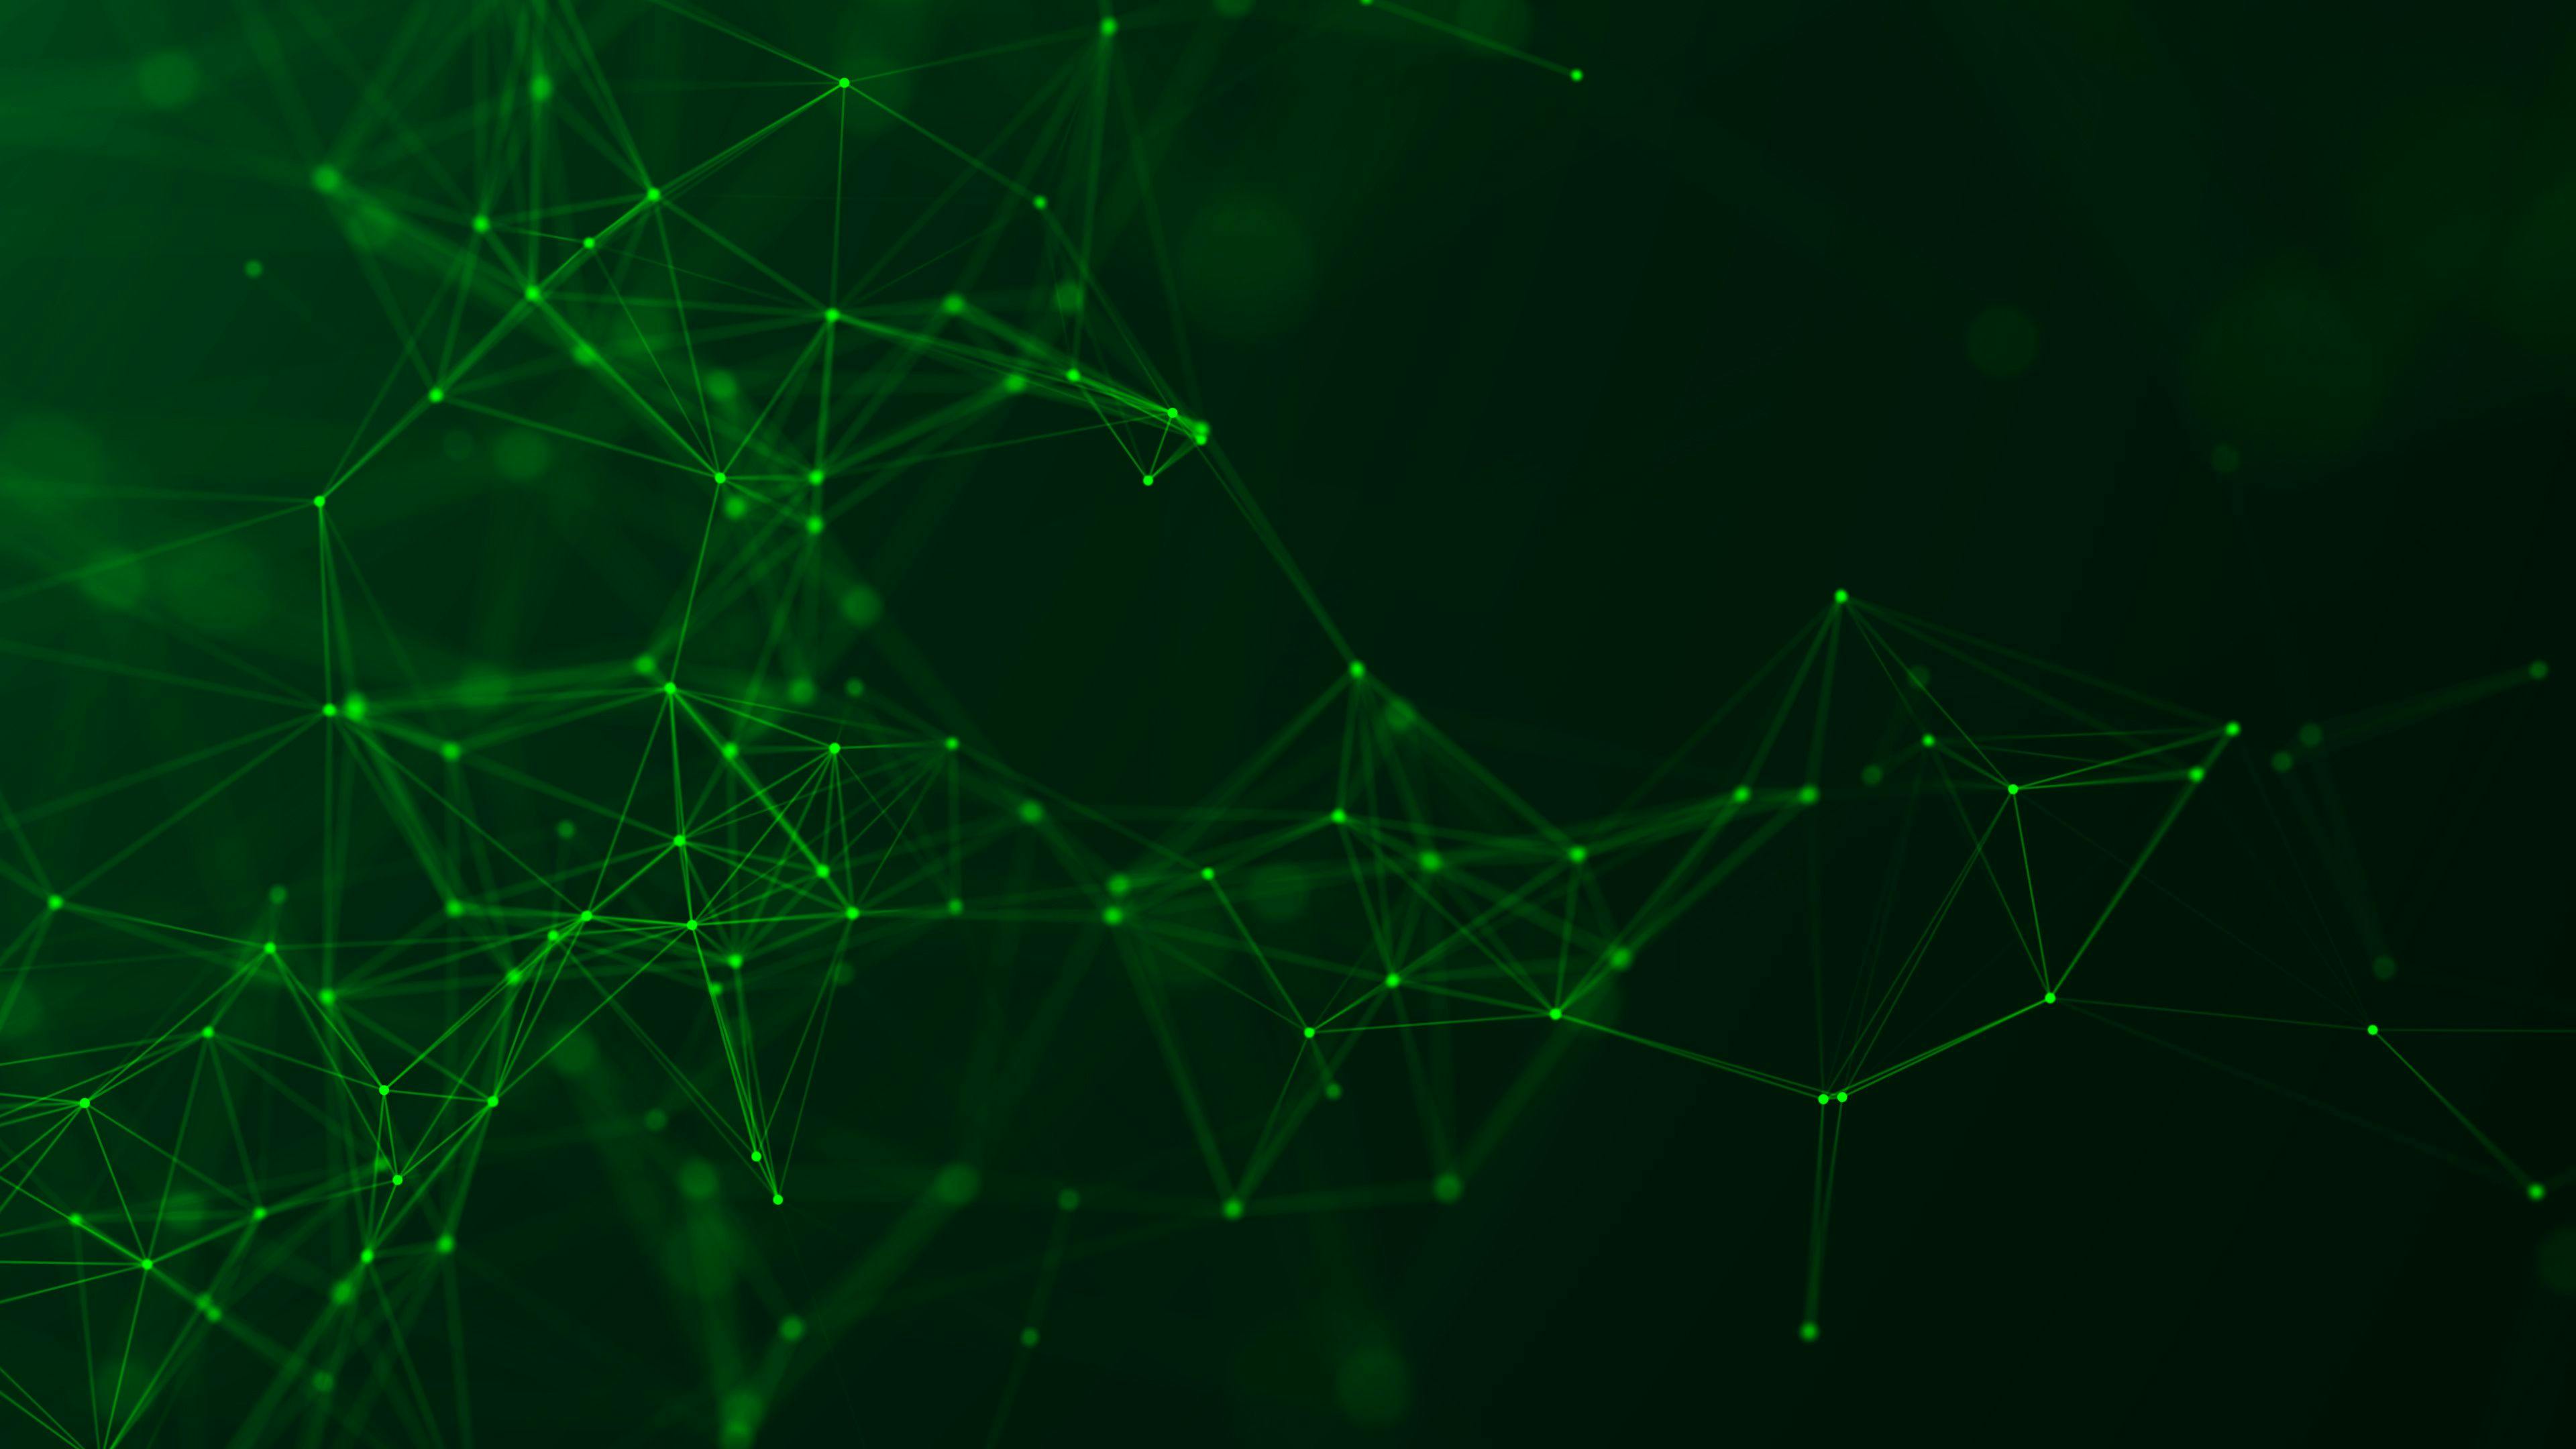 Abstract green digital background. Big data visualization. Science background. Big data complex with compounds. | Image Credit: © Vadym - stock.adobe.com